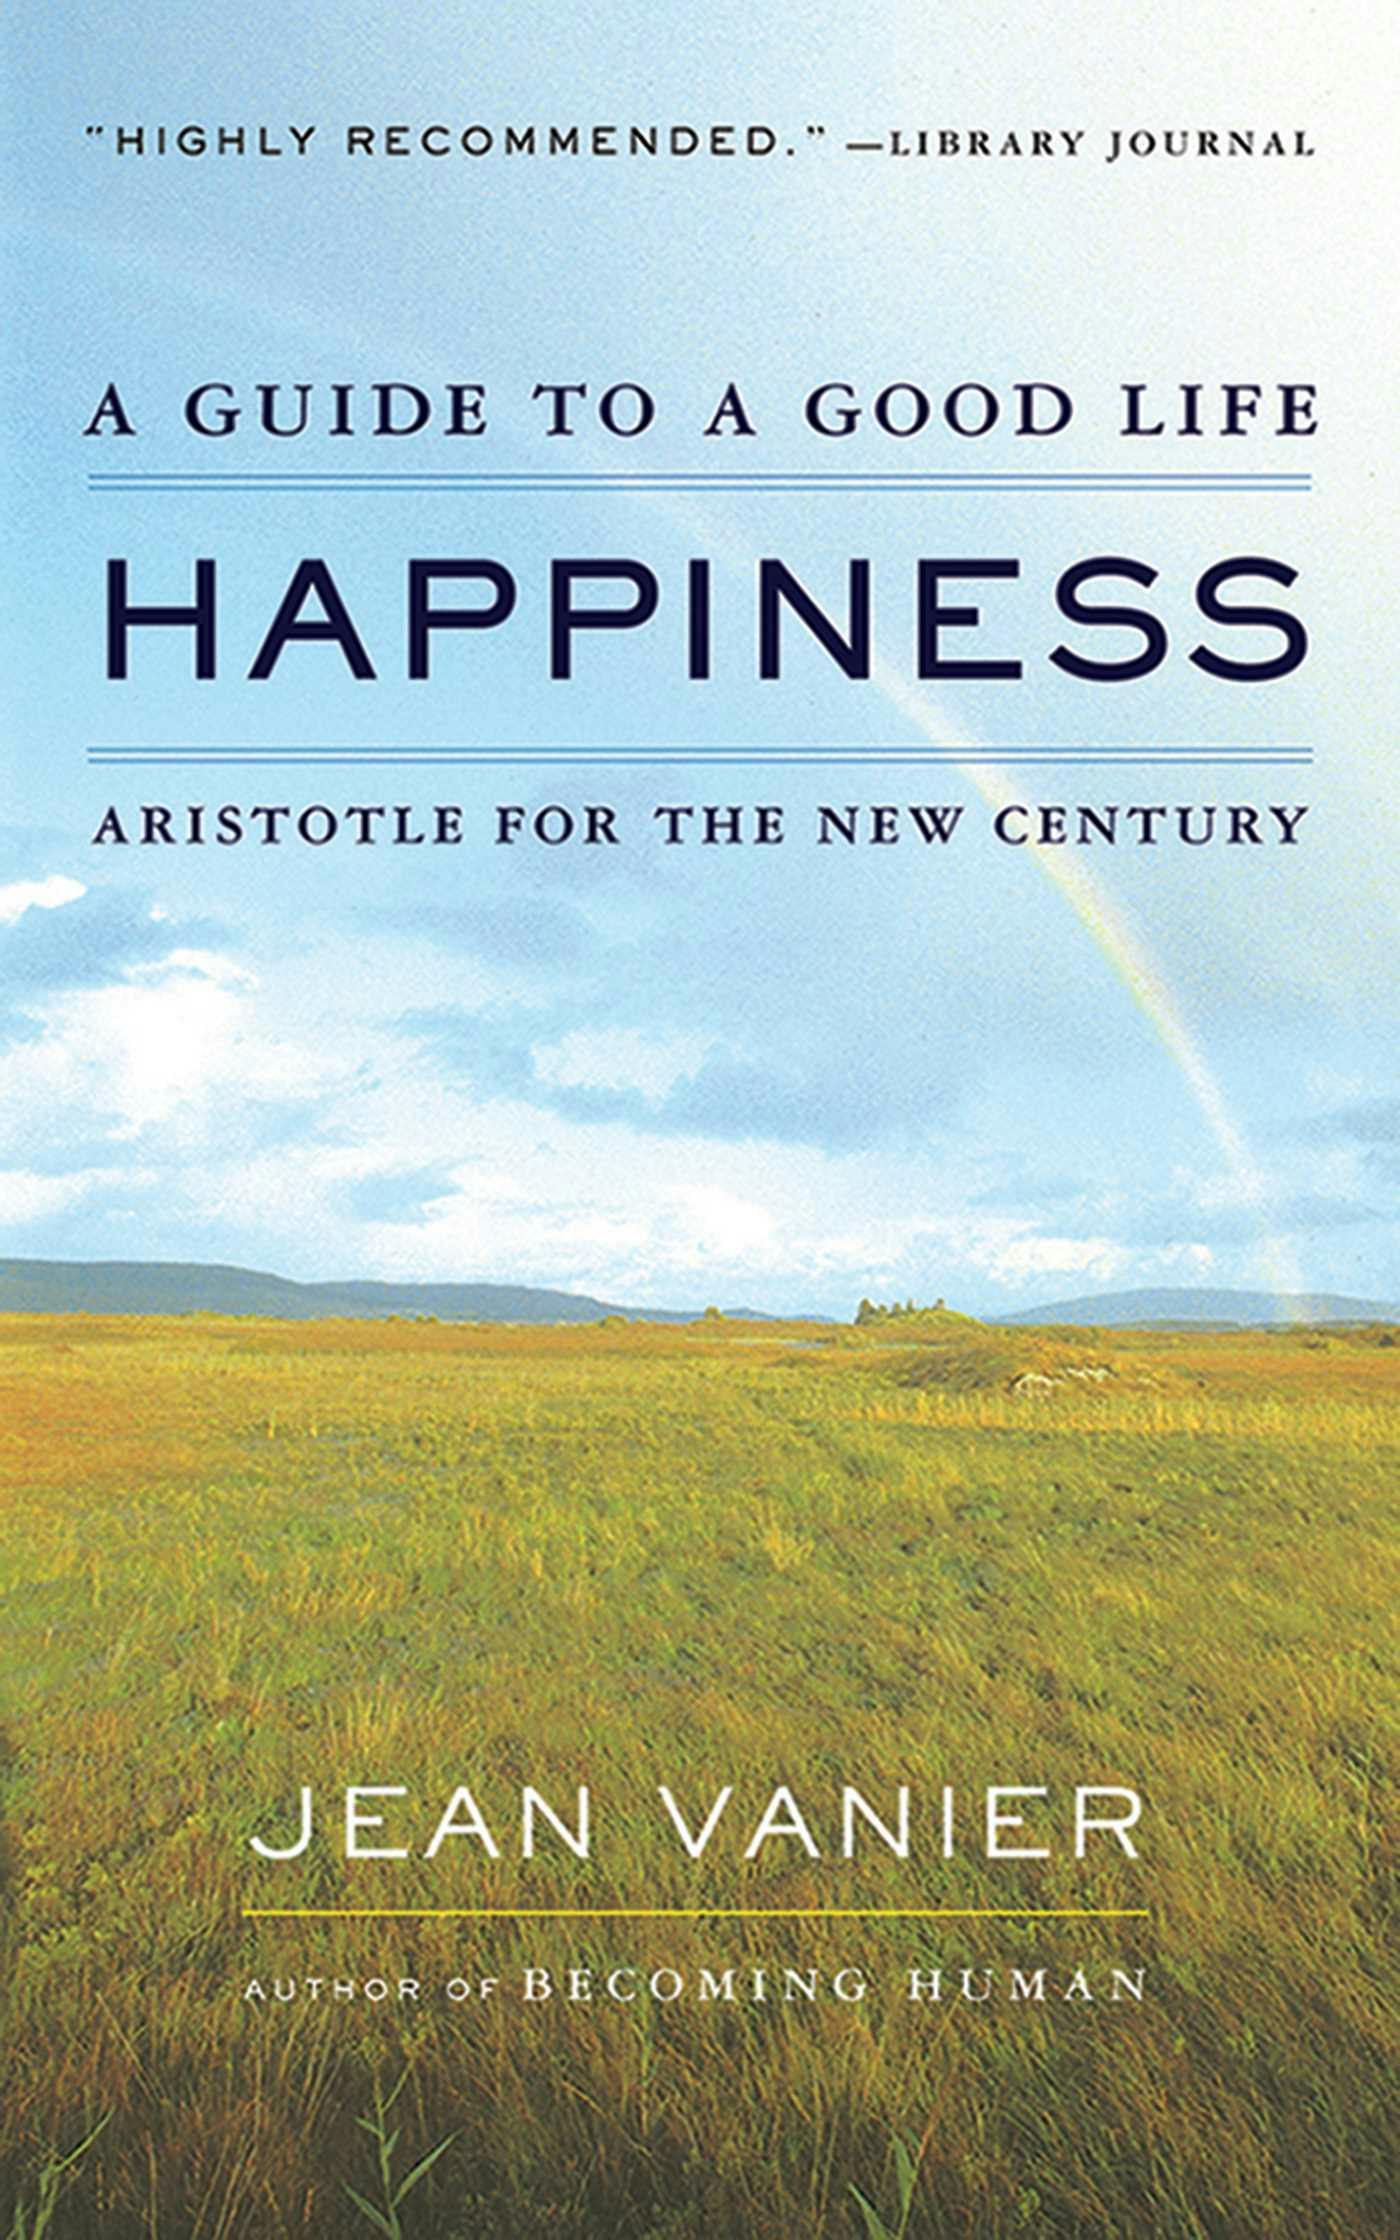 Happiness: A Guide to a Good Life, Aristotle for the New Century - Jean Vanier